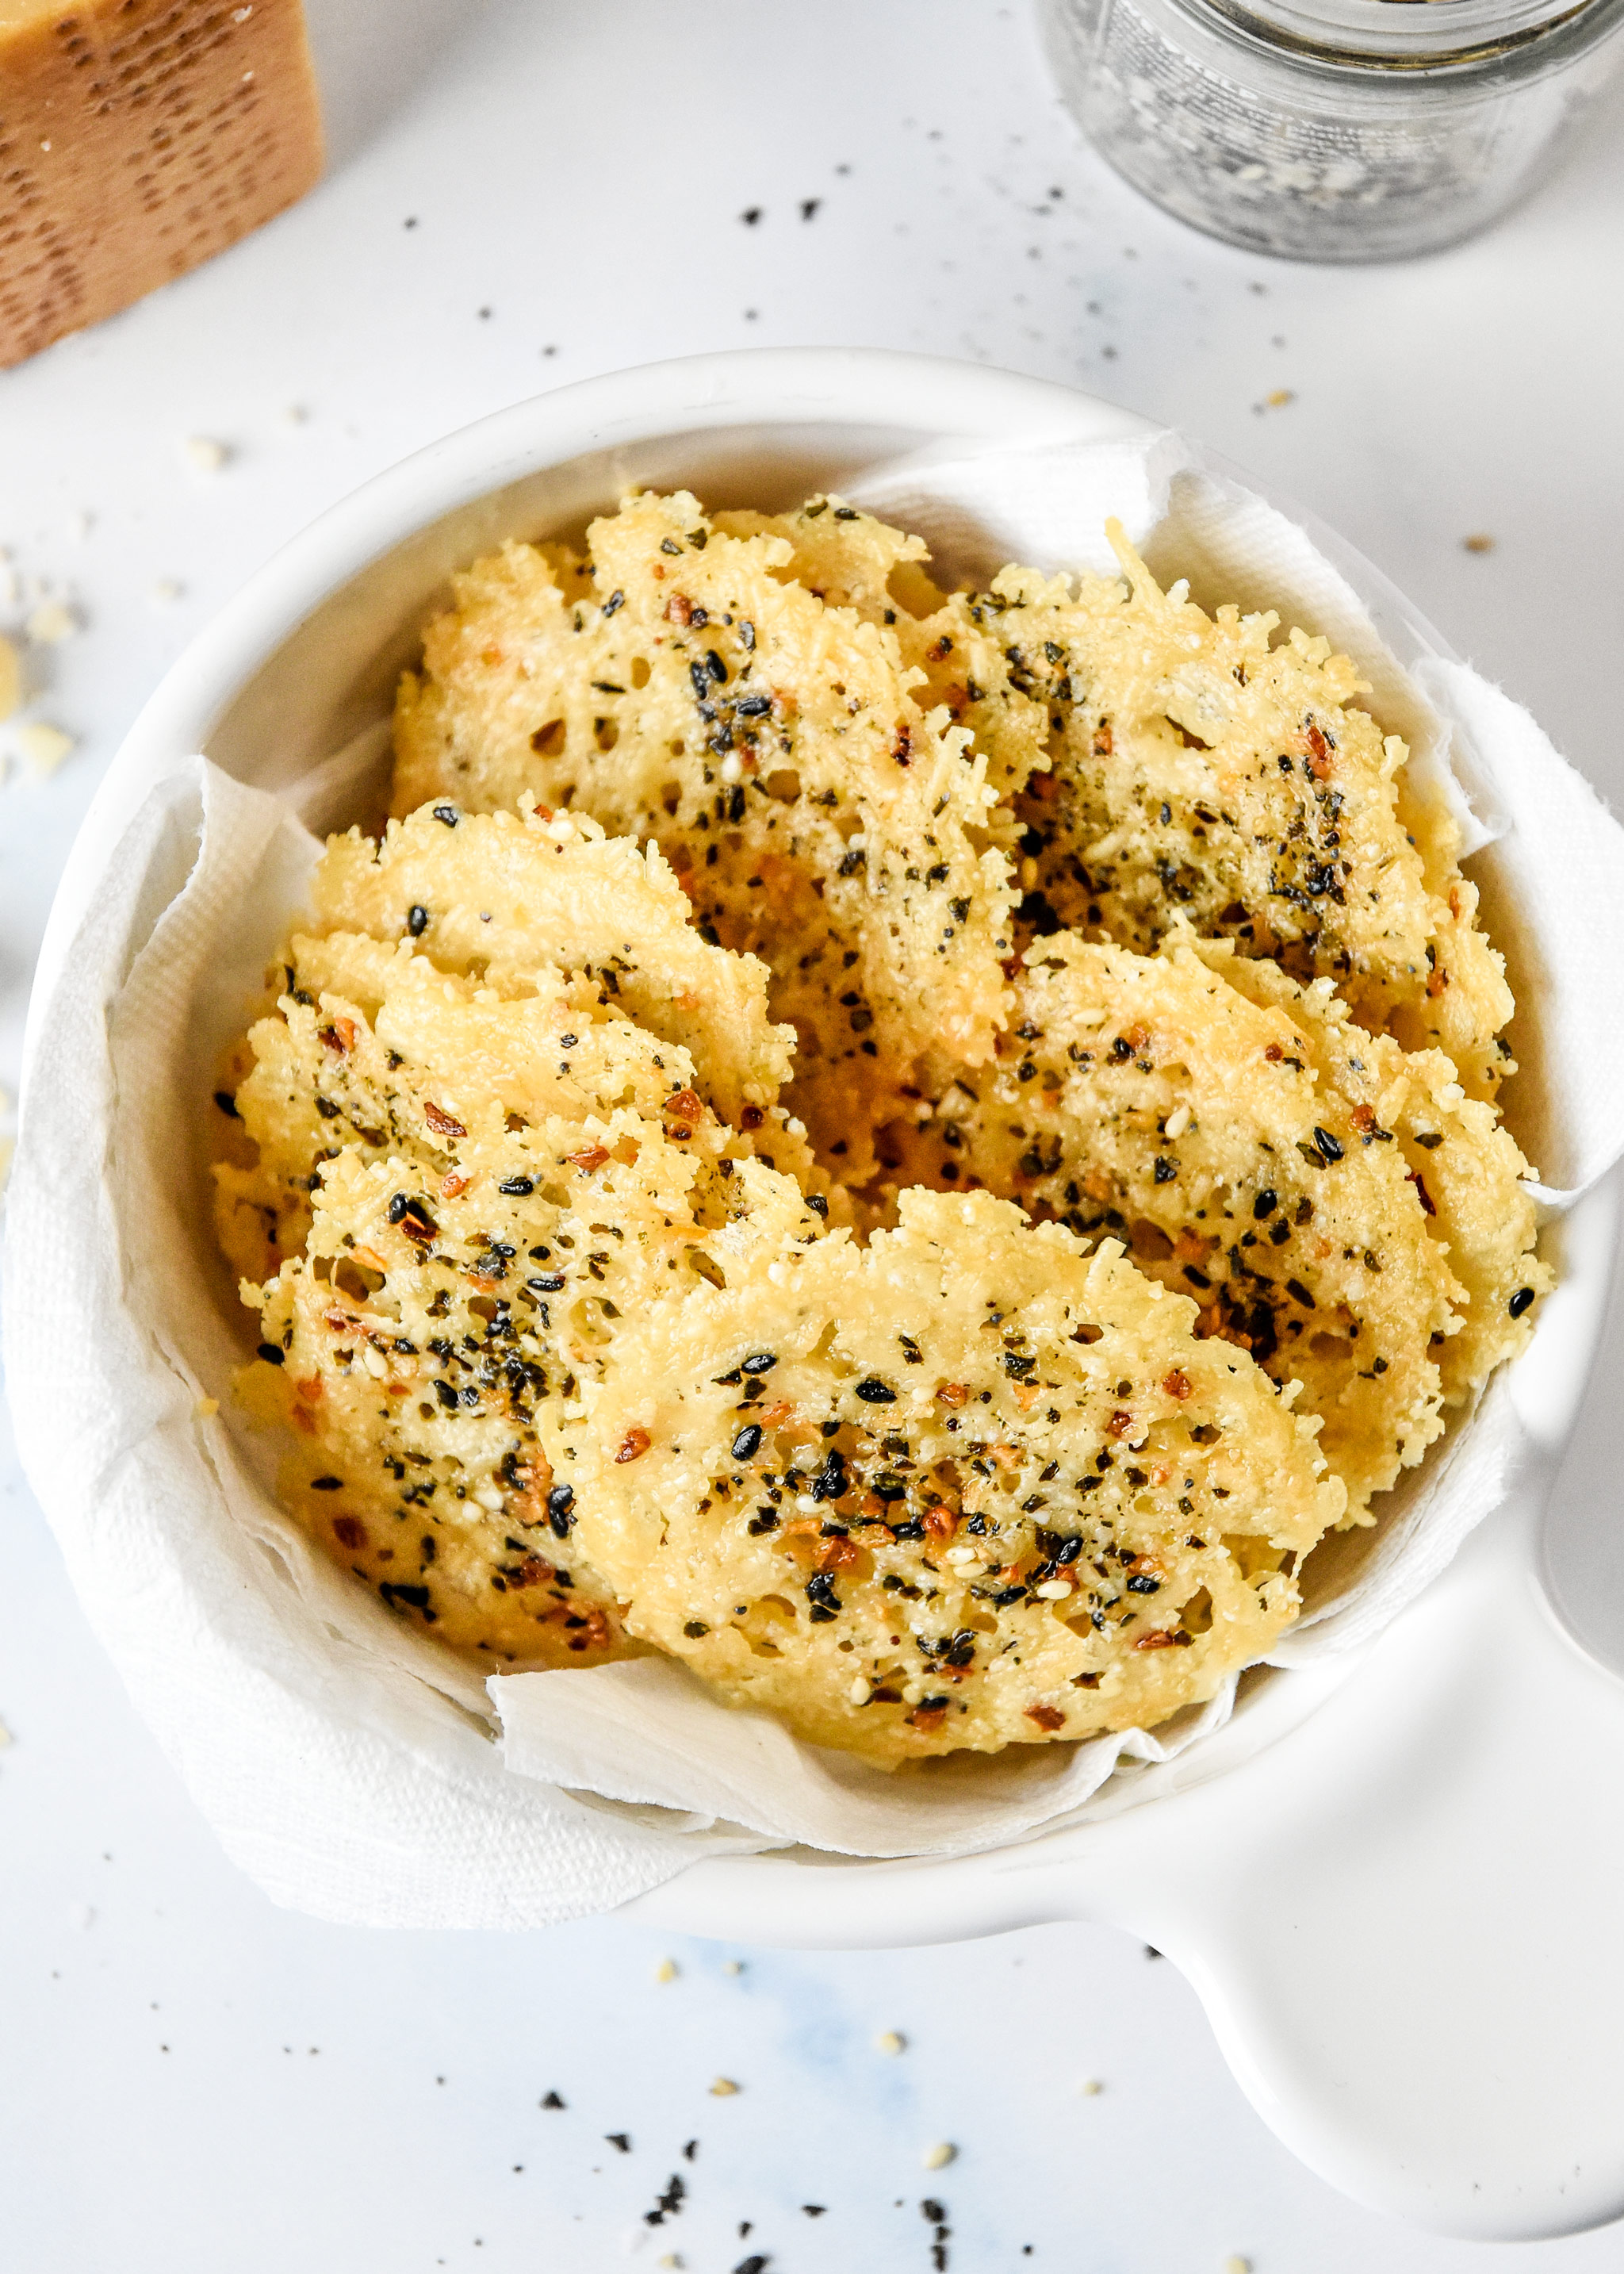 everything bagel baked parmesan crisps in a bowl ready for snacking